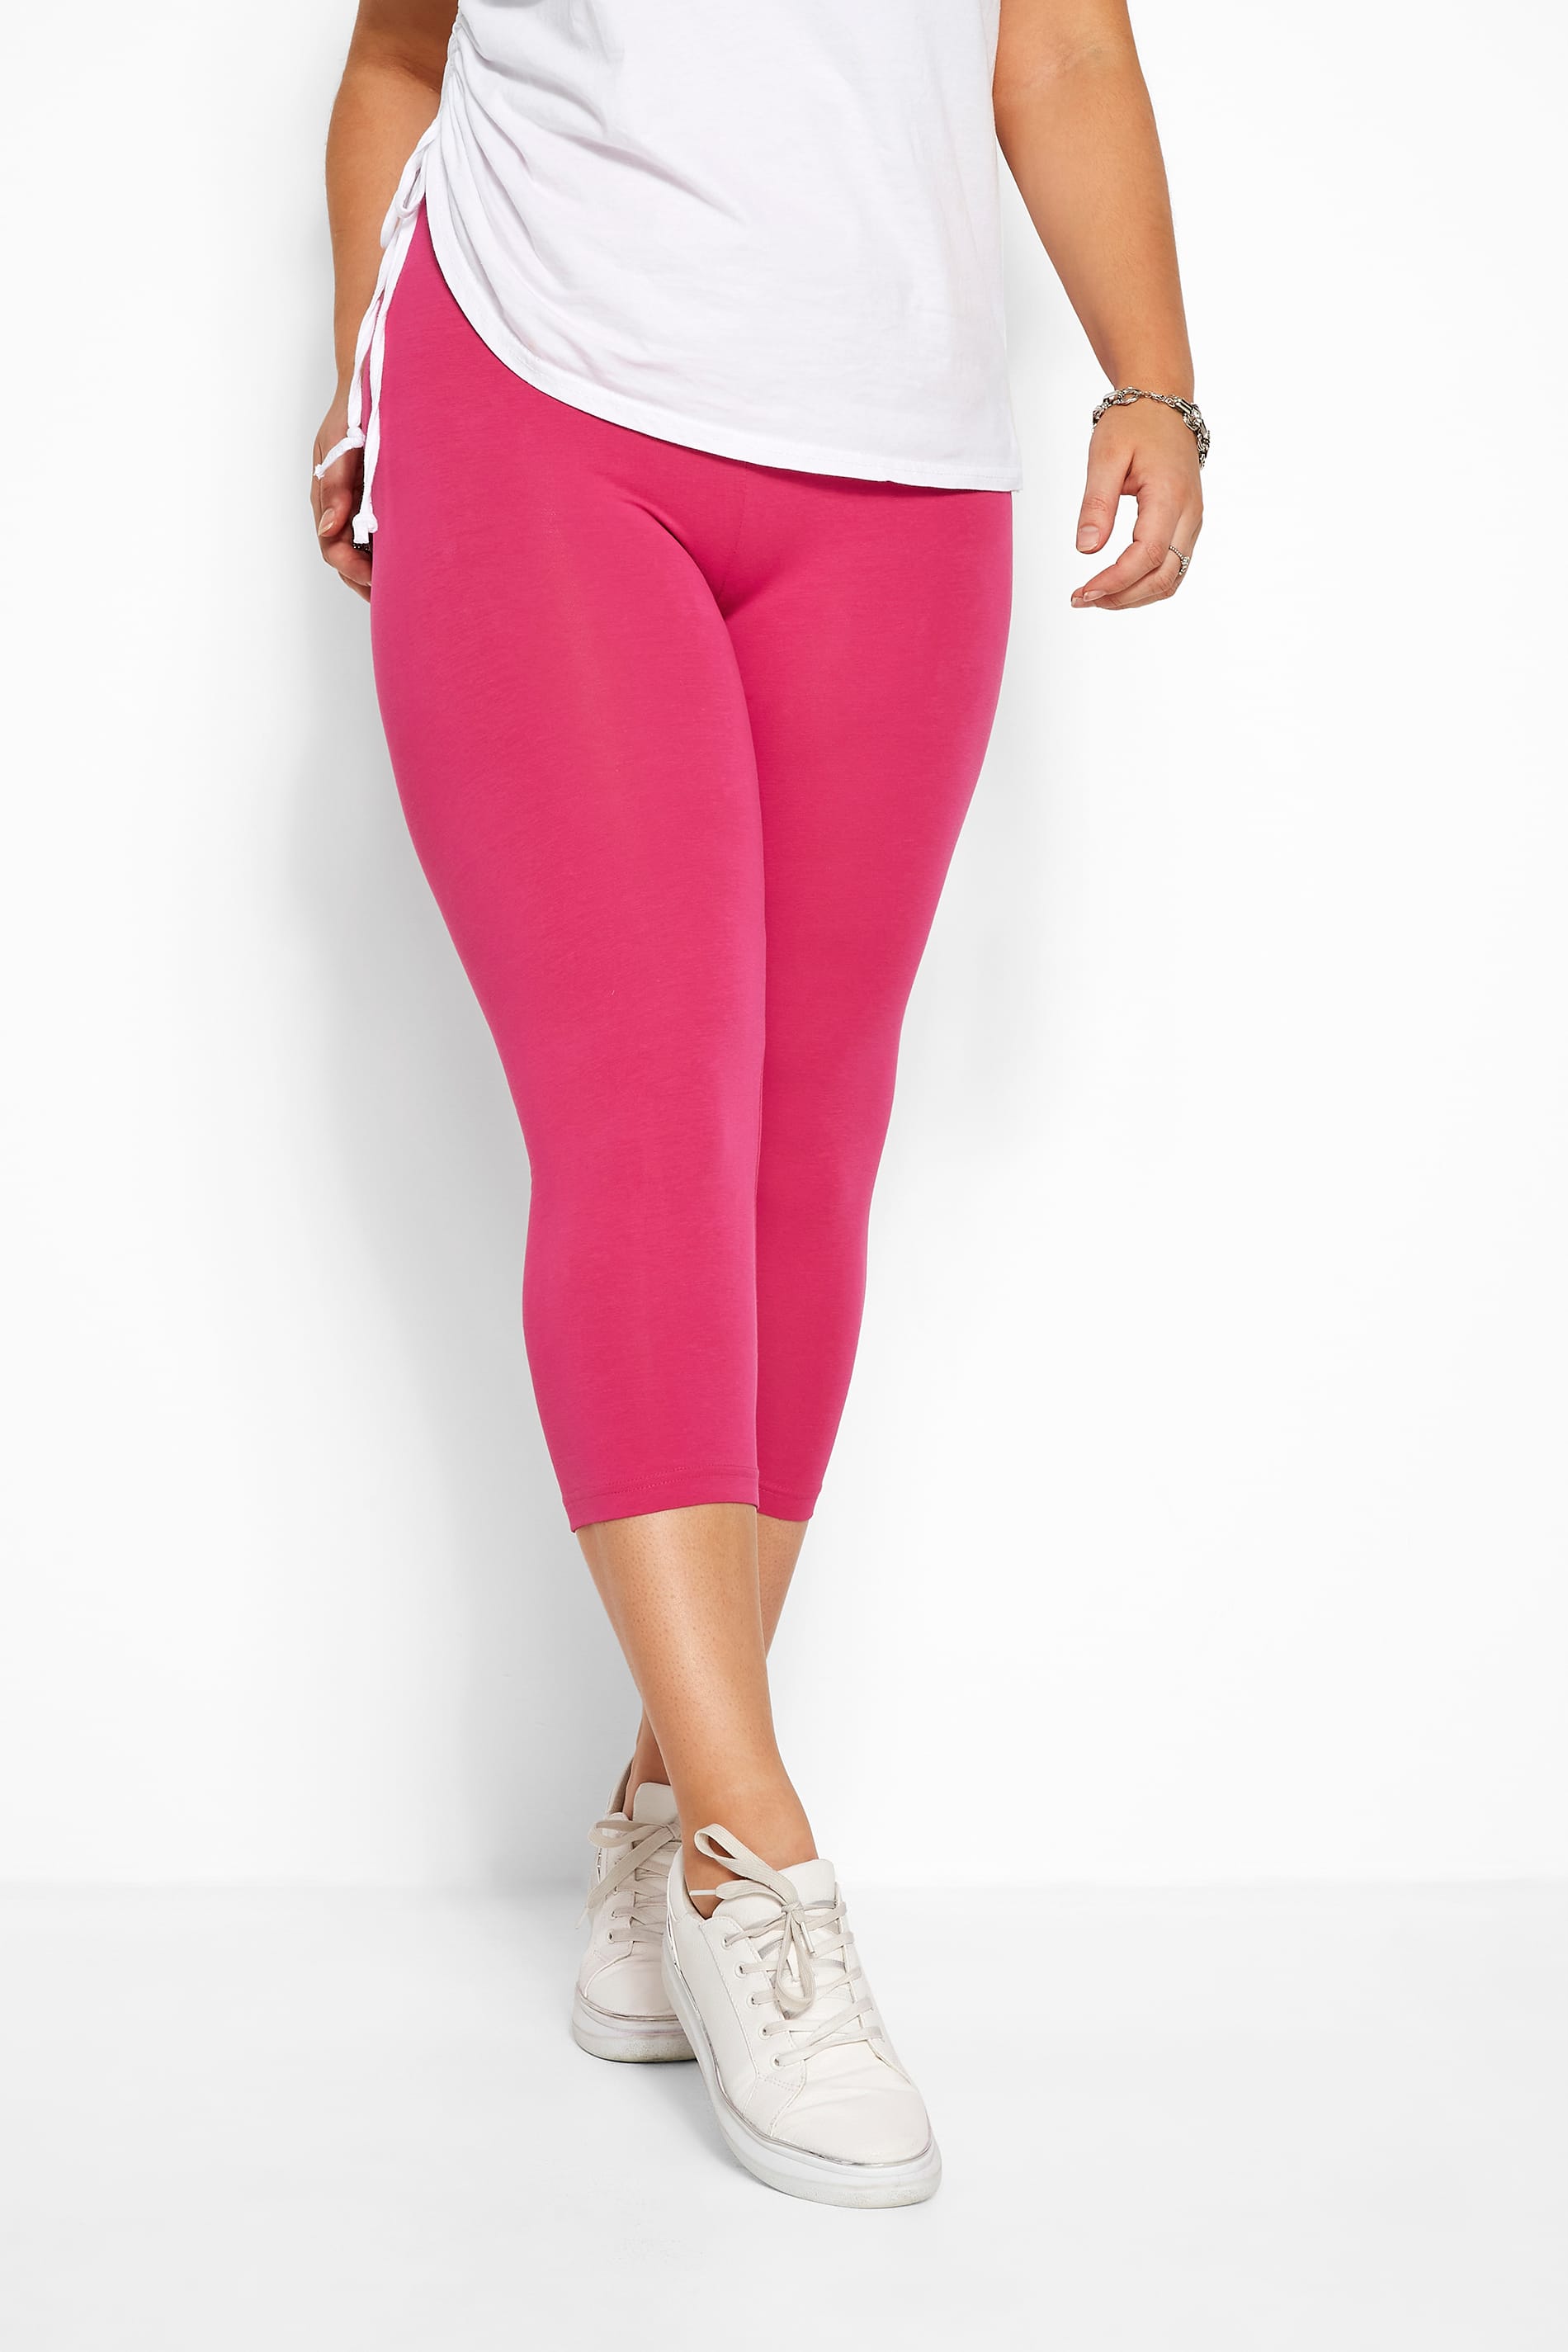 Plus Size Bright Pink Cropped Leggings | Sizes 16 to 36 | Yours Clothing